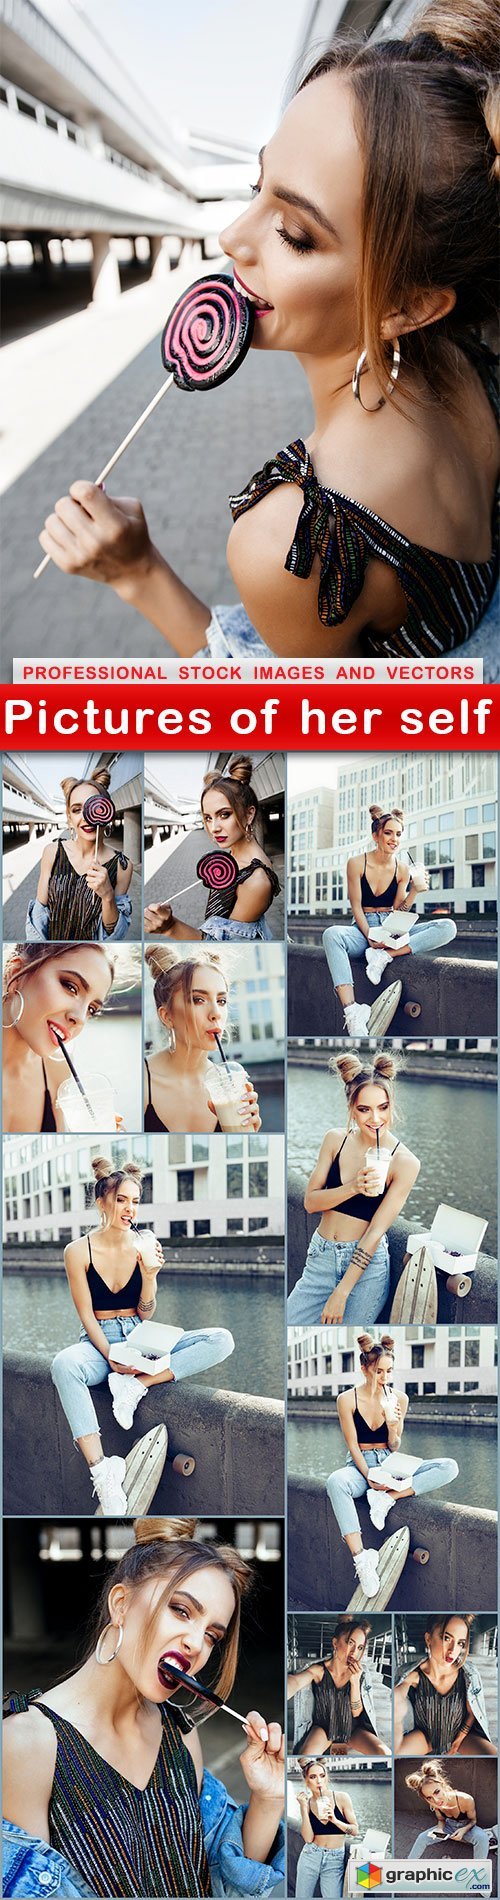 Pictures of her self - 14 UHQ JPEG